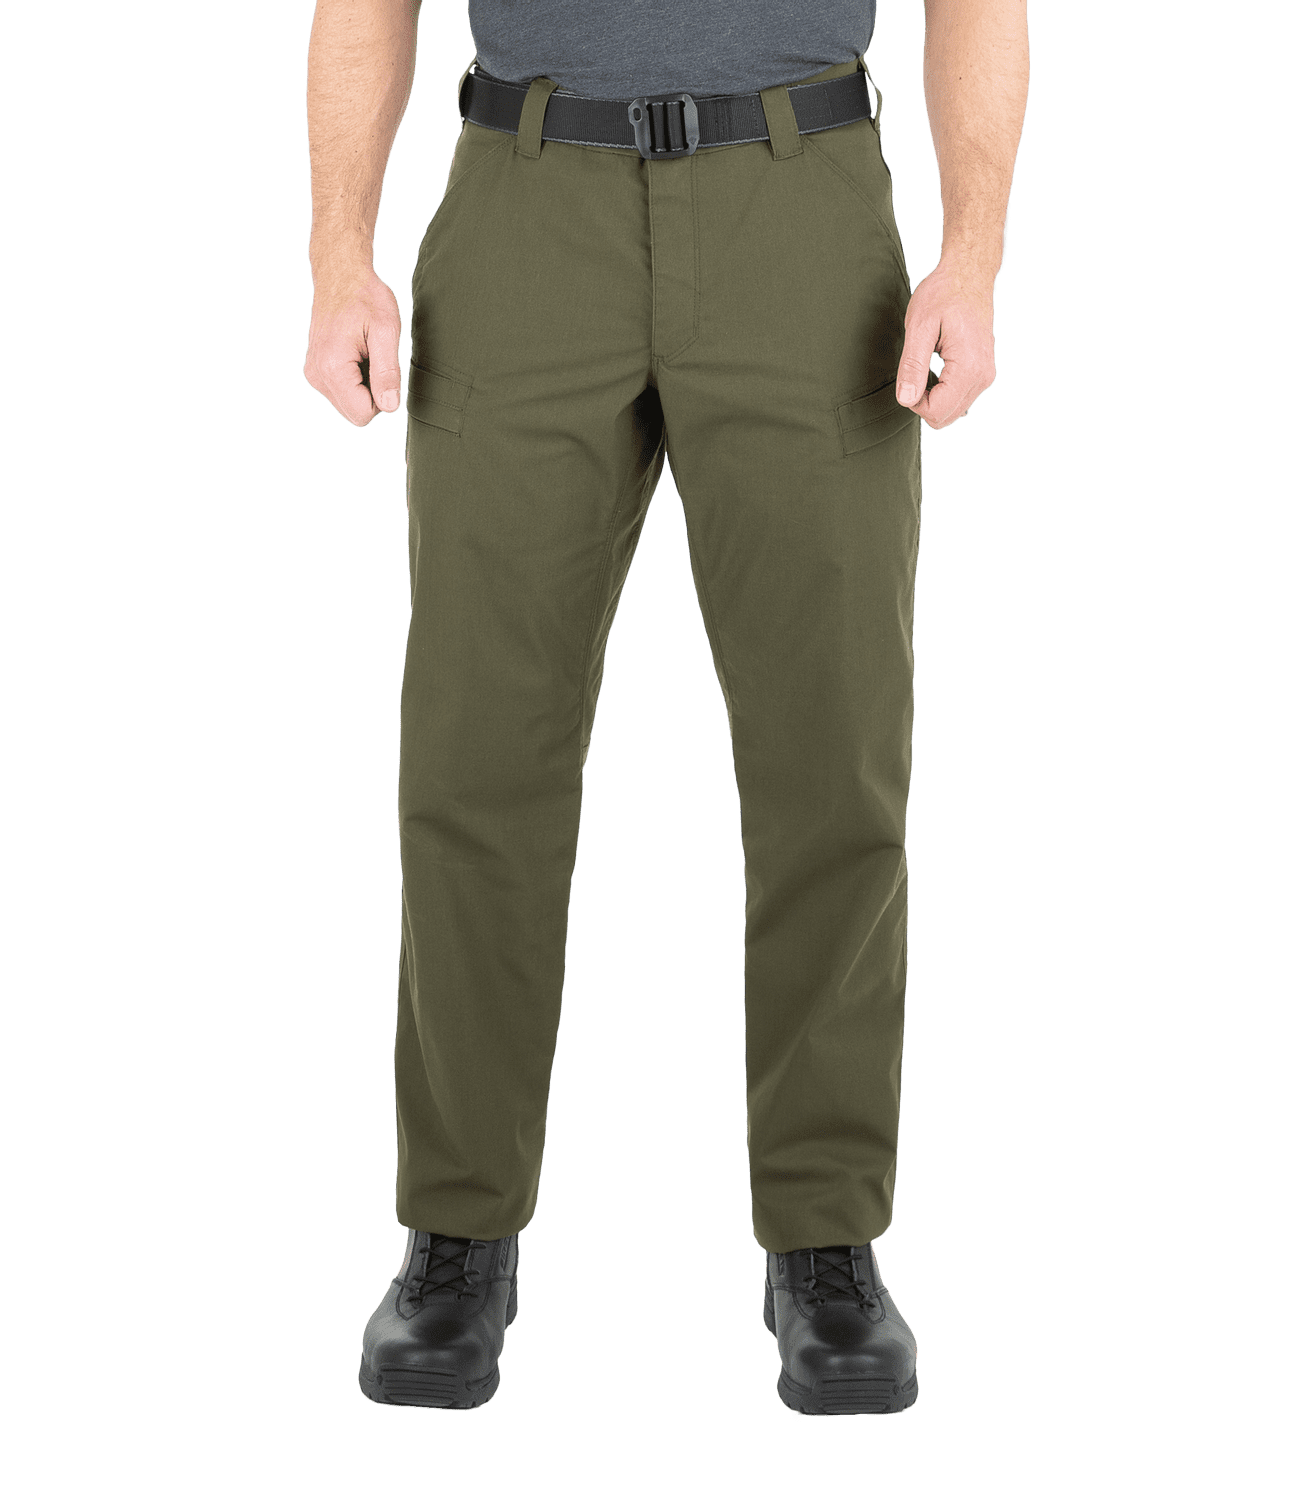 First Tactical Men's A2 Pant, OD Green - COPS Products